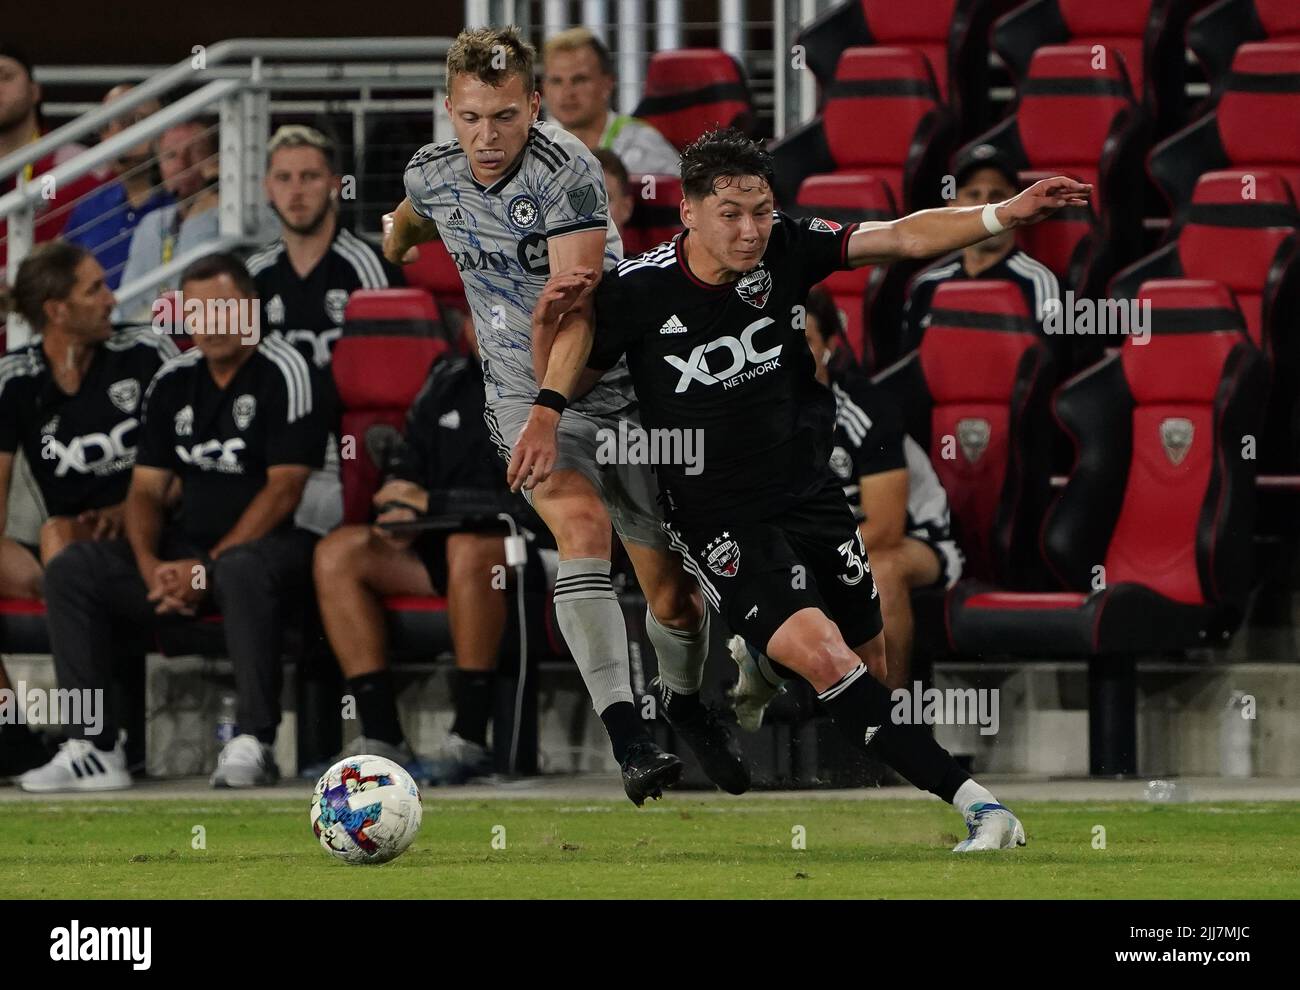 WASHINGTON, DC, USA - 23 JULY 2022: CF Montréal defender Alistair Johnston (22) and D.C. United midfielder Theodore Ku-DiPietro (35) clash during a MLS match between D.C United and C.F. Montreal, on July 23, 2022, at Audi Field, in Washington, DC. (Photo by Tony Quinn-Alamy Live News) Stock Photo